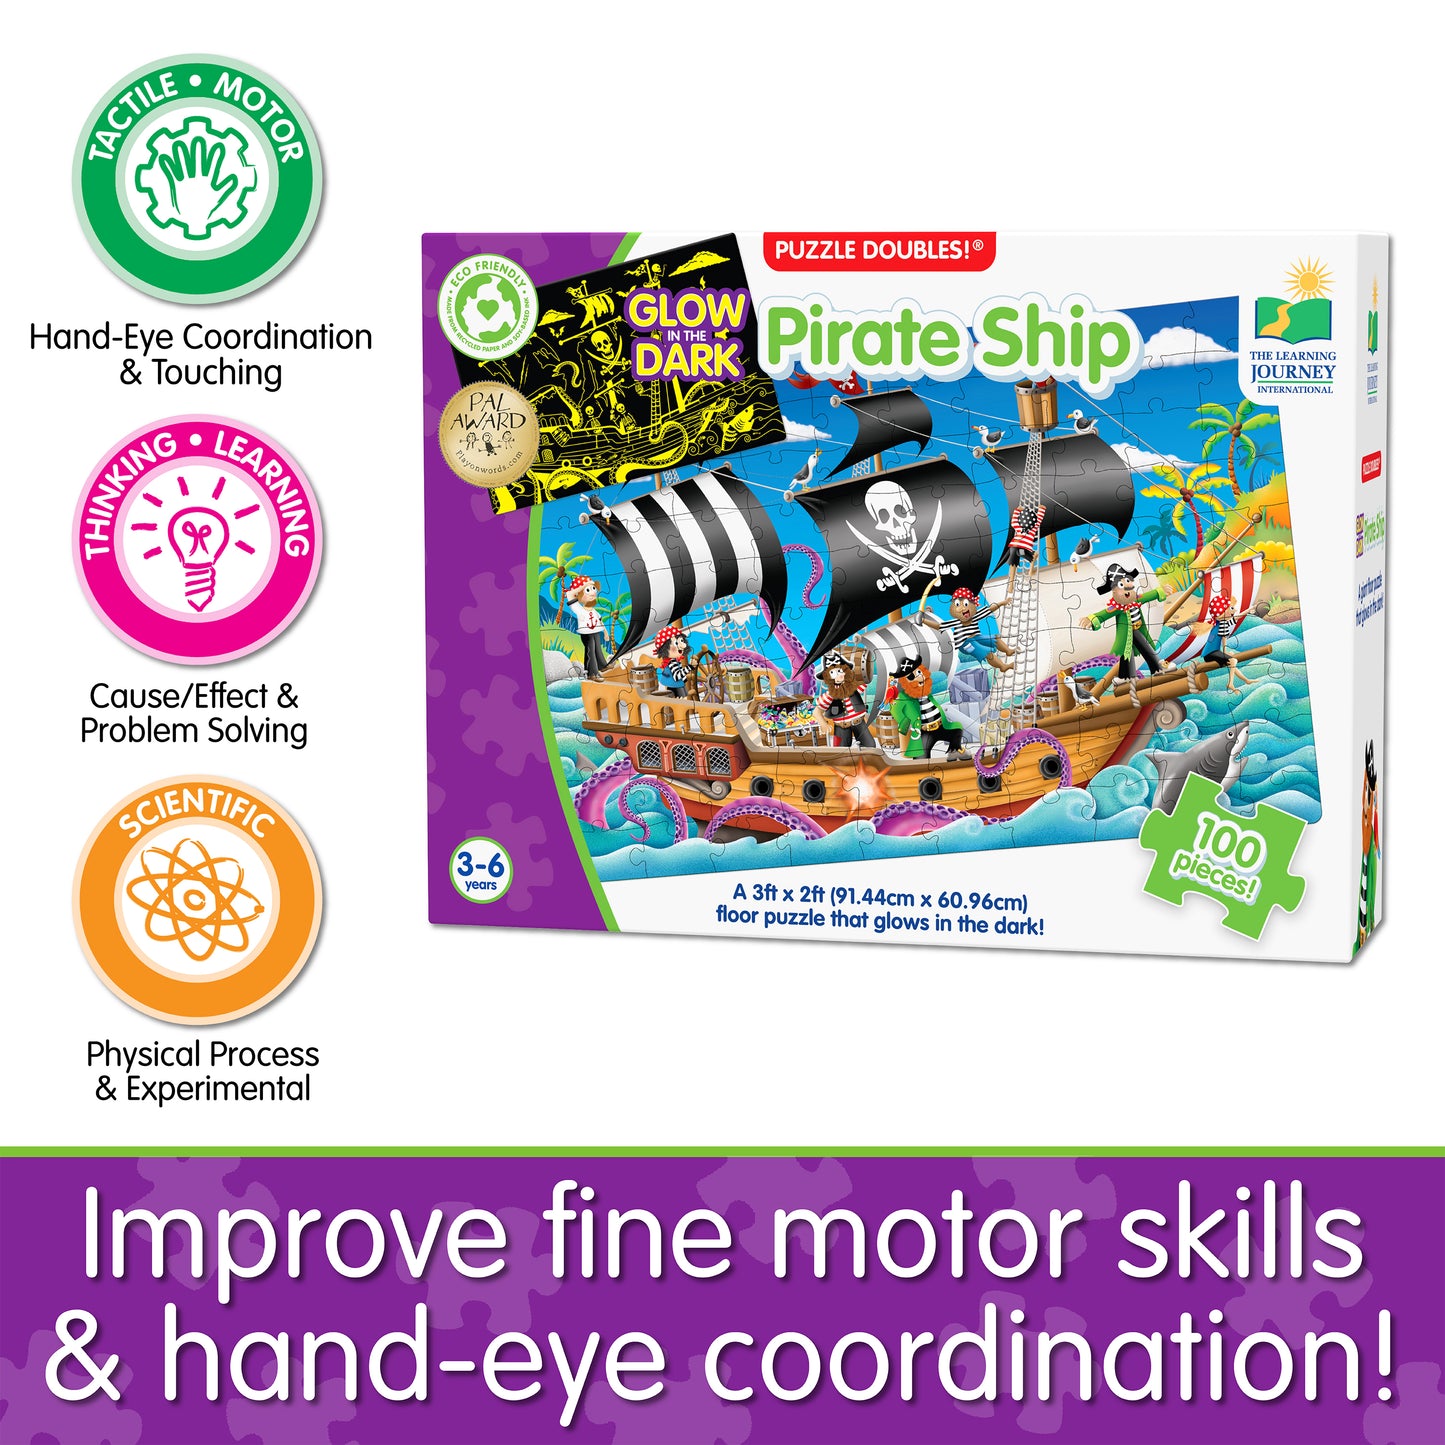 Infographic about Glow in the Dark - Pirate Ship's educational benefits that says, "Improve fine motor skills and hand-eye coordination!"